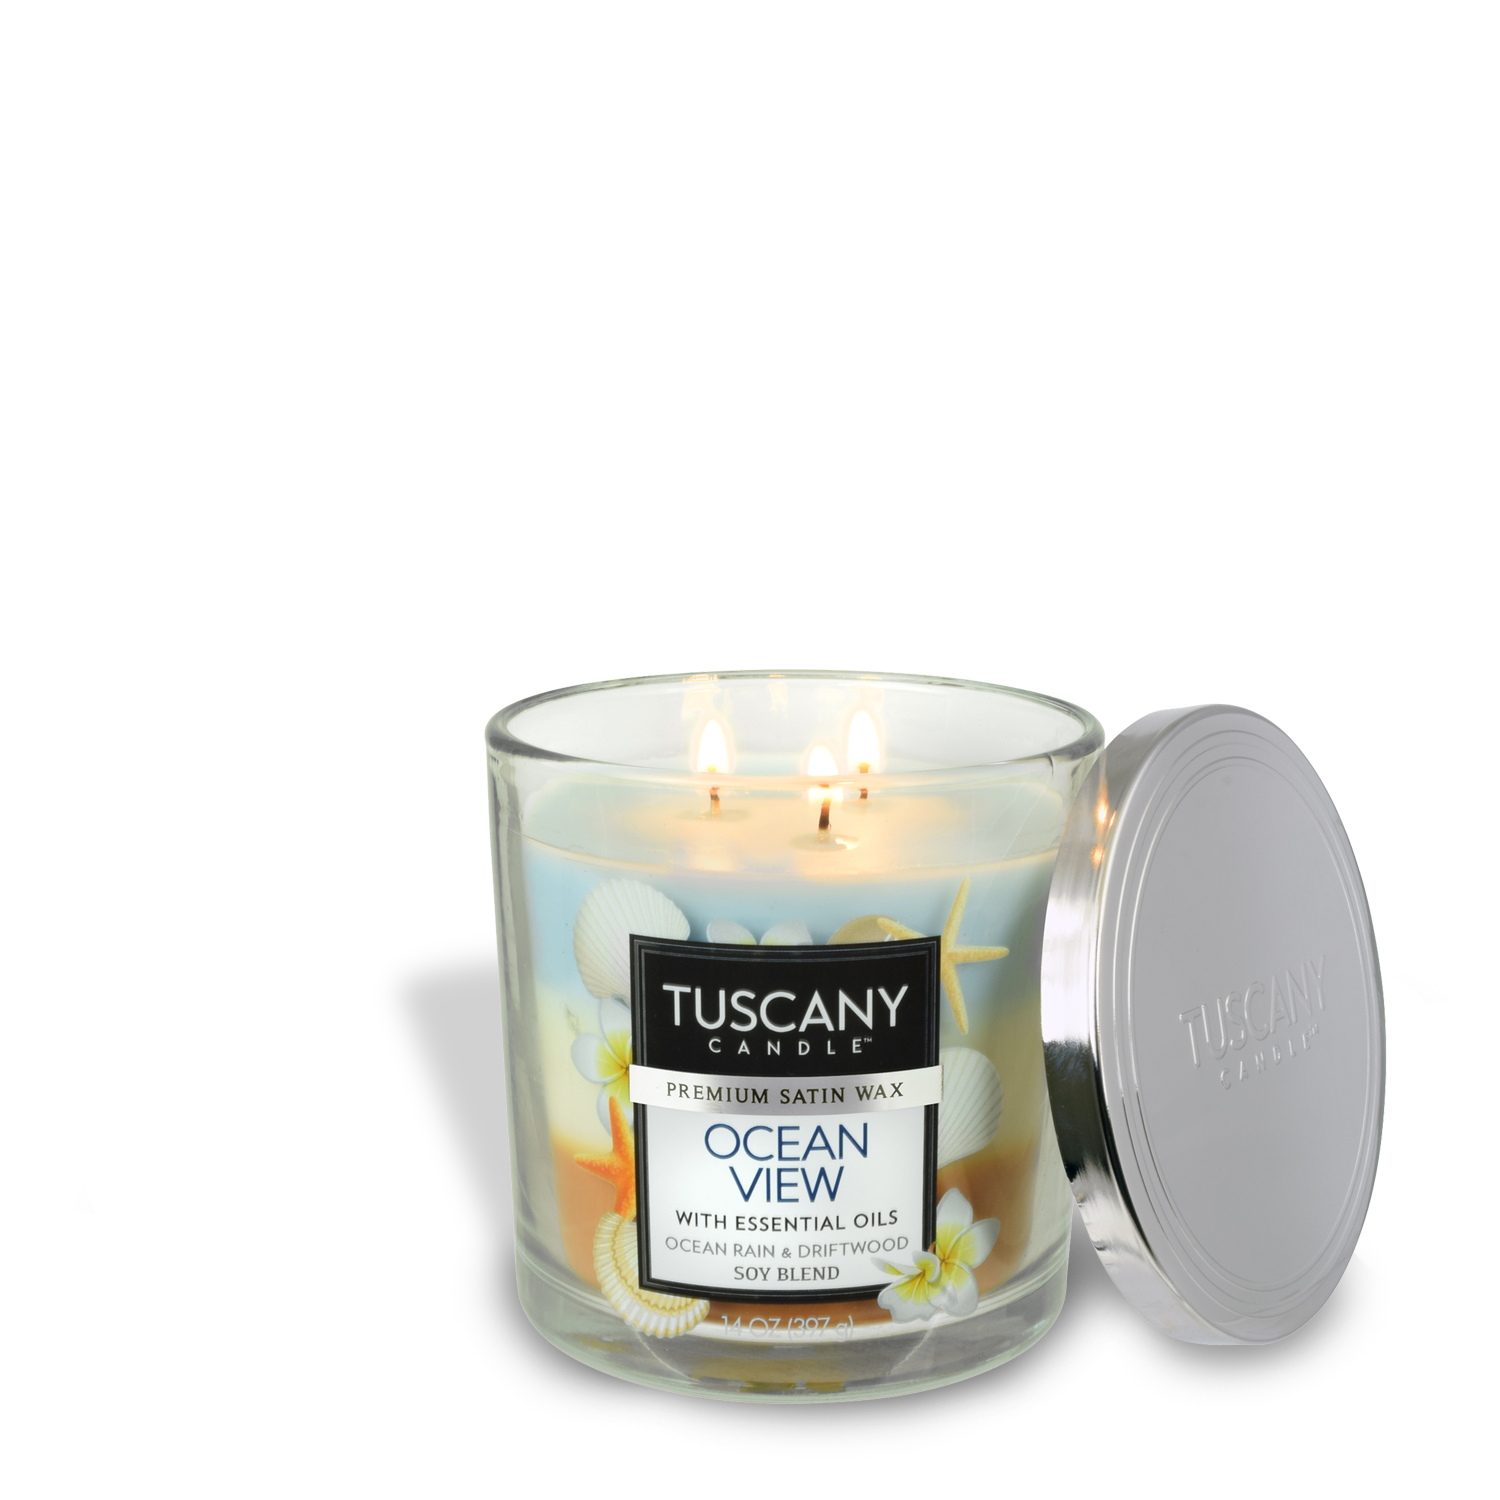 Tuscany Candle® EVD Ocean View Long-Lasting Scented Jar Candle (14 oz).